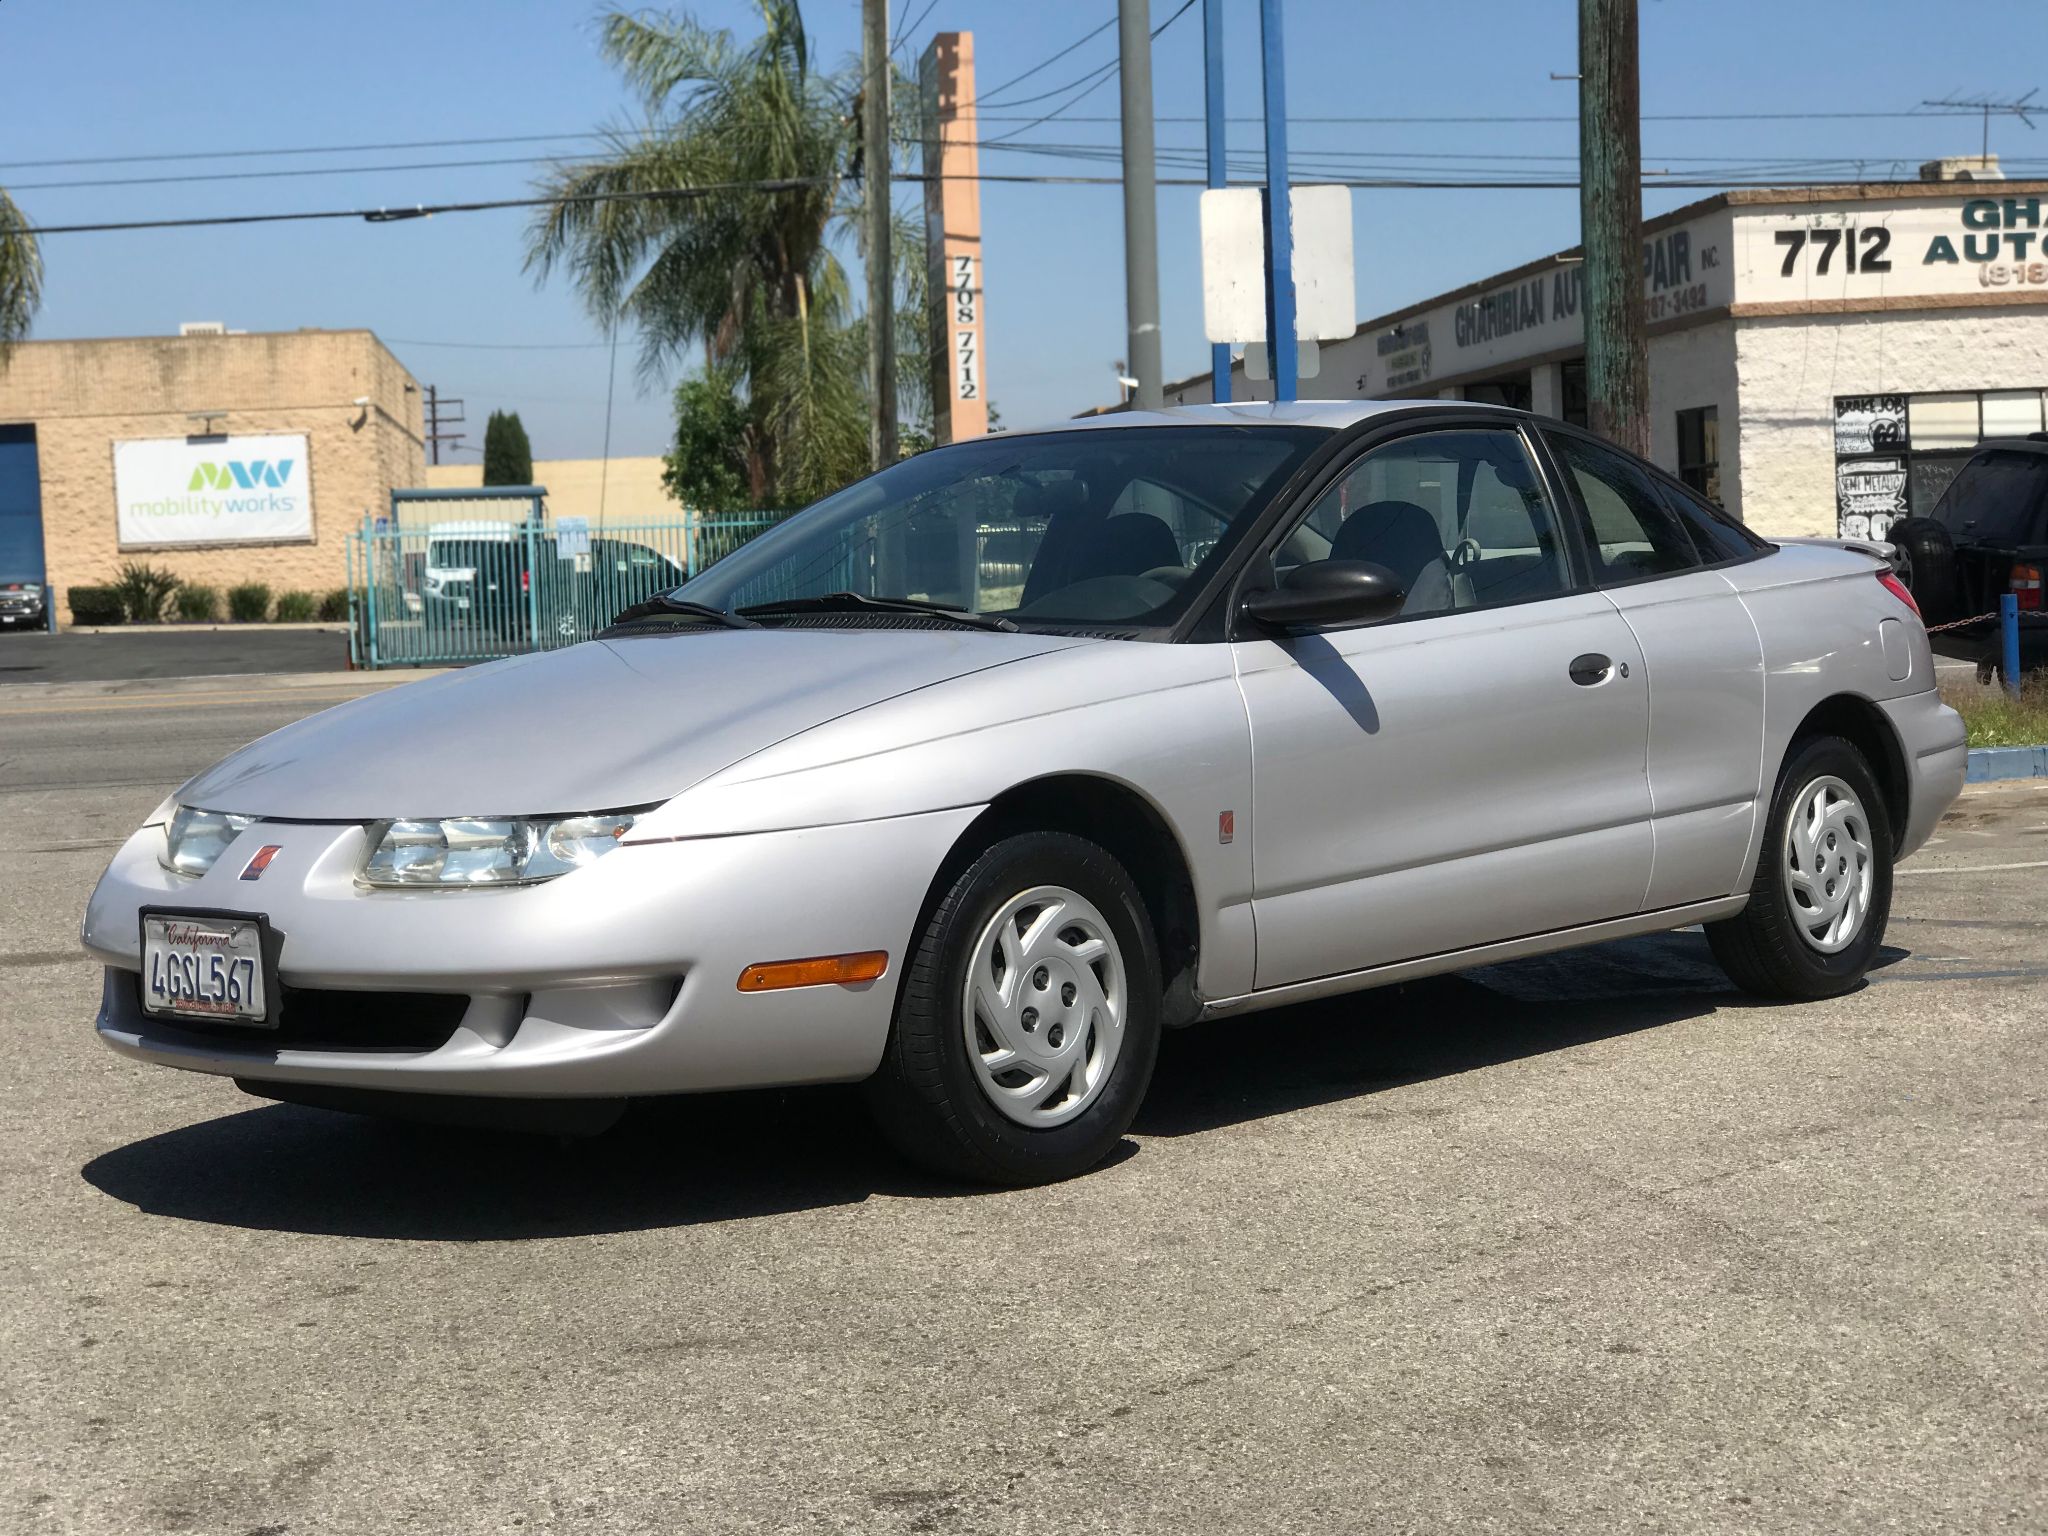 Used 1999 Saturn SC 3dr 1.8 TURBO at City Cars Warehouse Inc